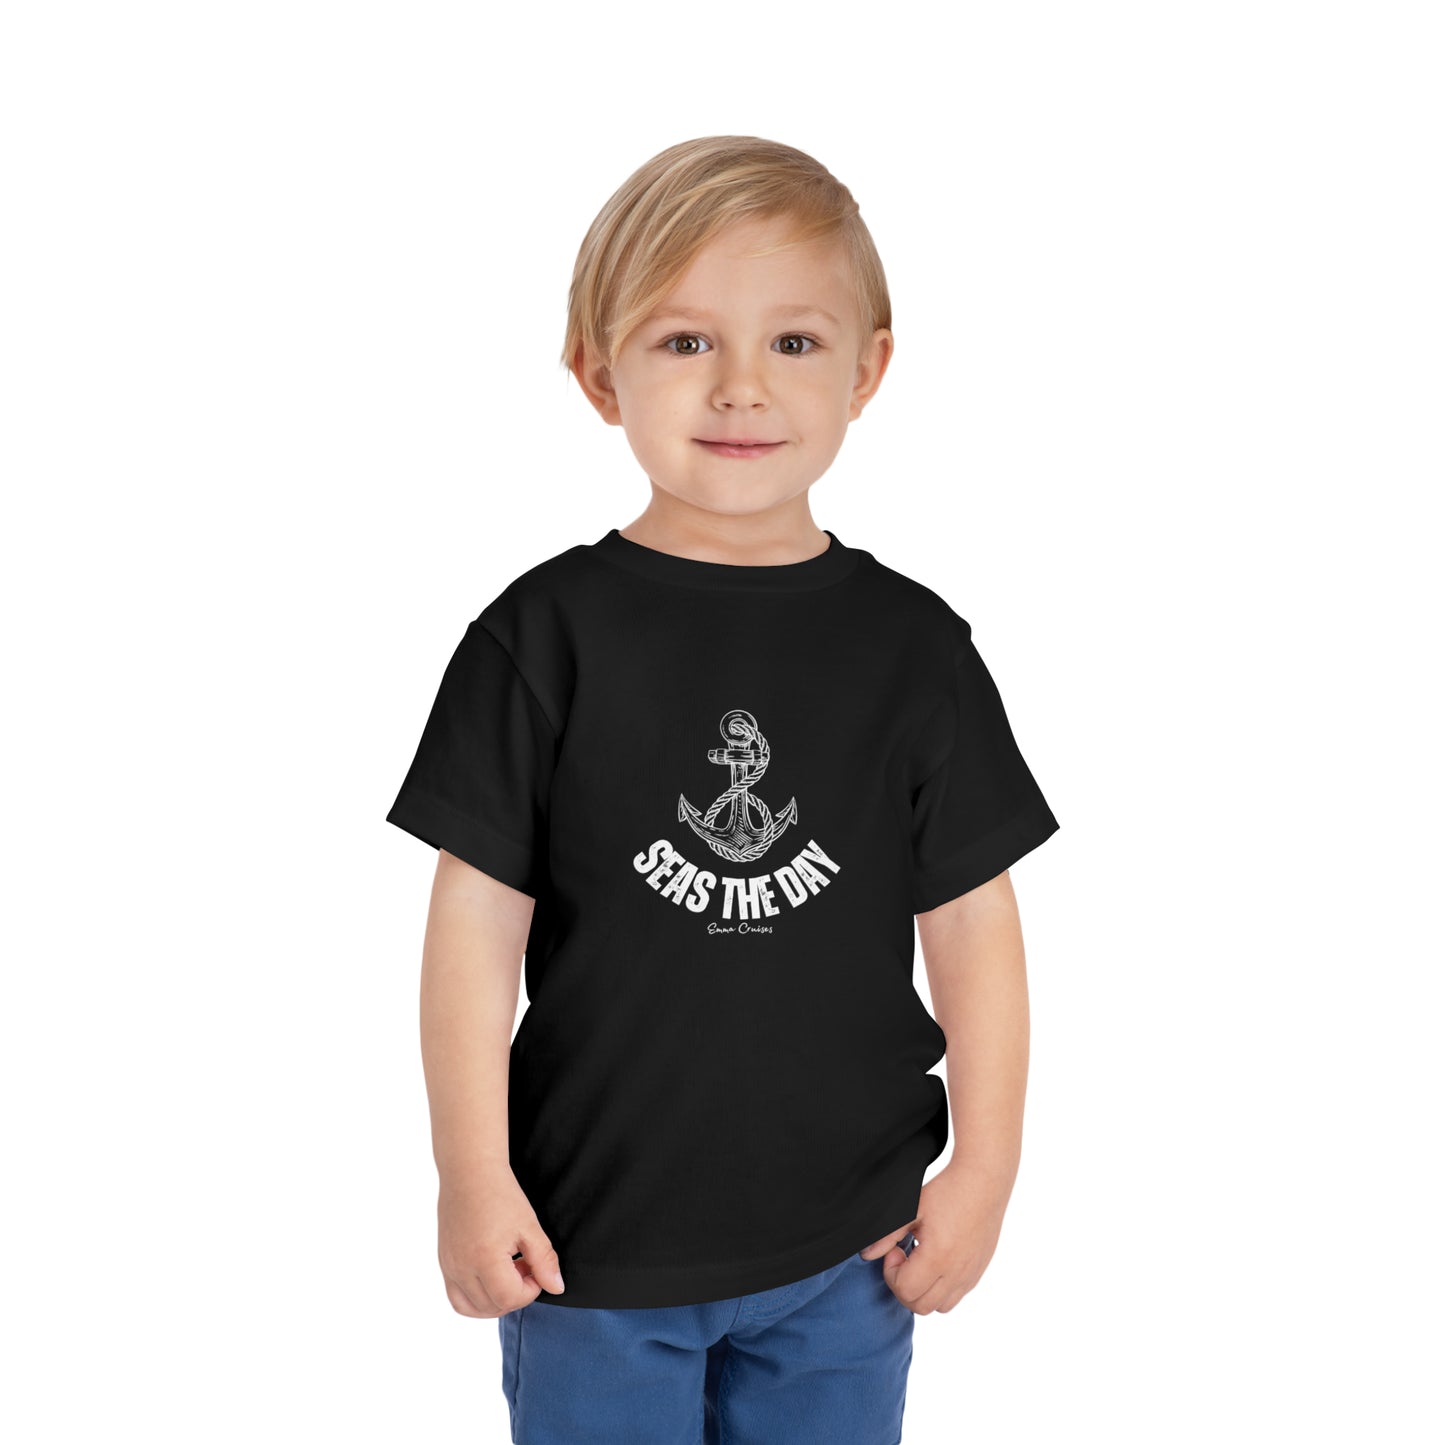 Seas the Day - Toddler UNISEX T-Shirt